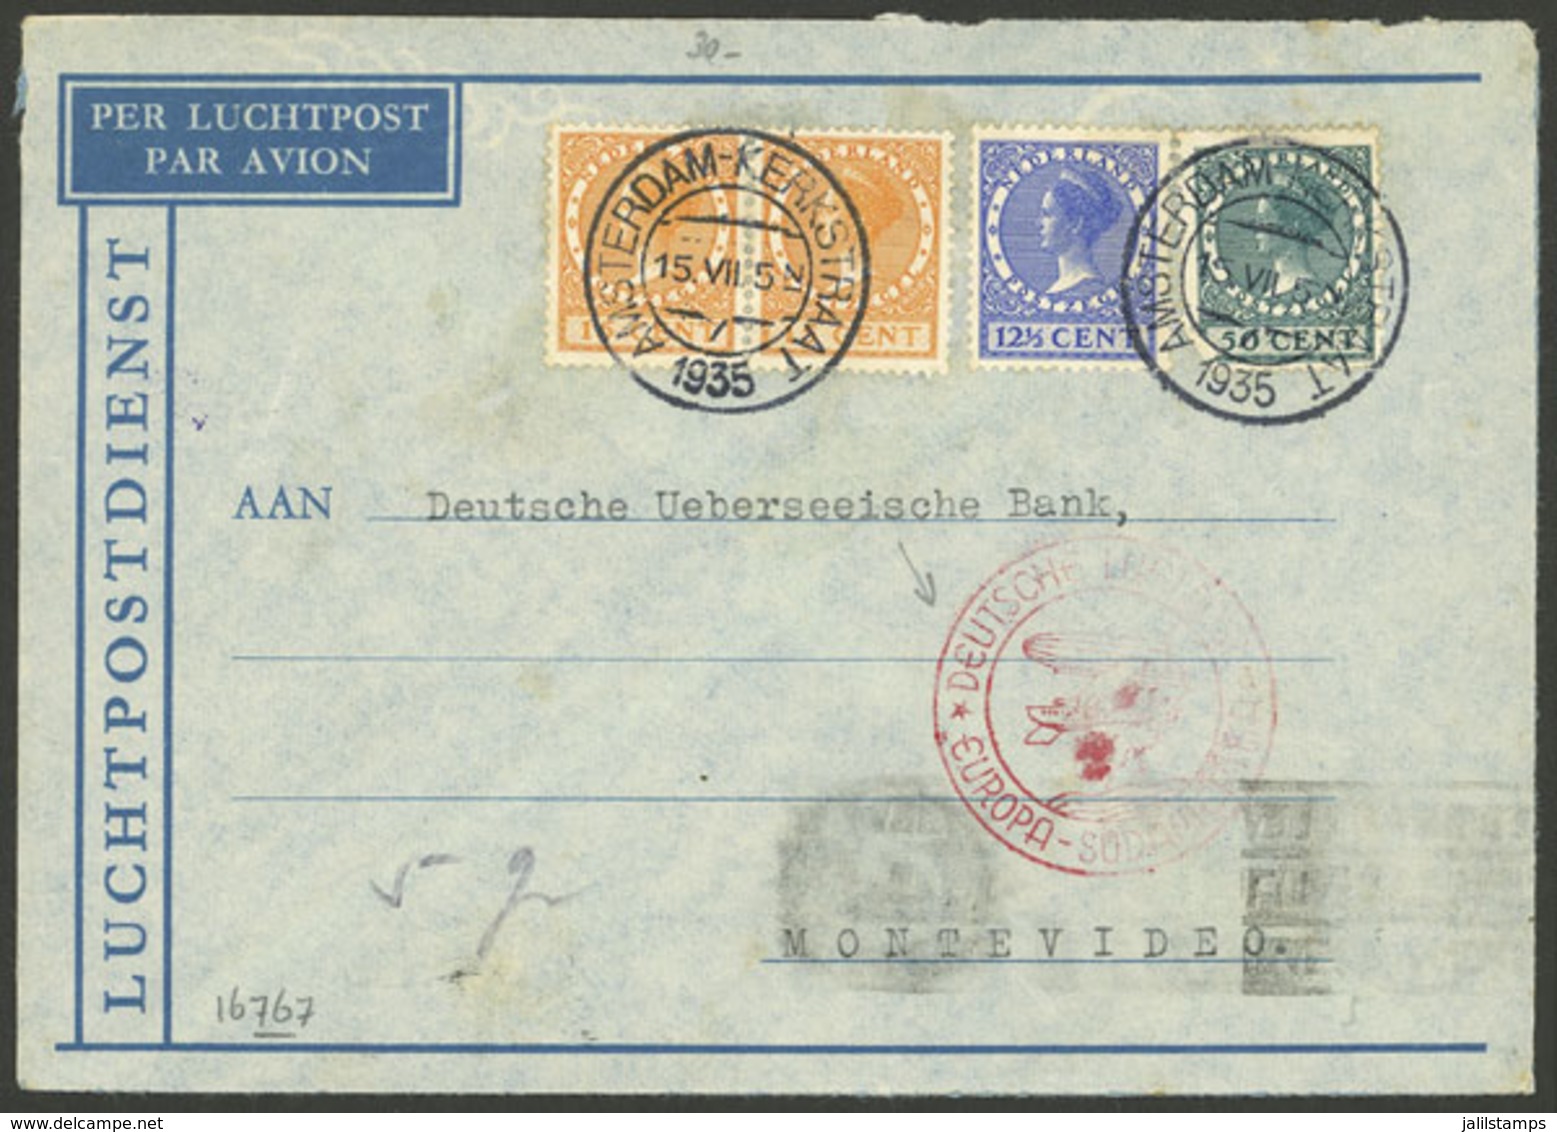 NETHERLANDS: 15/JUL/1935 Amsterdam - Uruguay, Airmail Cover Sent By German DLH, On Back Arrival Mark Of Montevideo 22/JU - Lettres & Documents